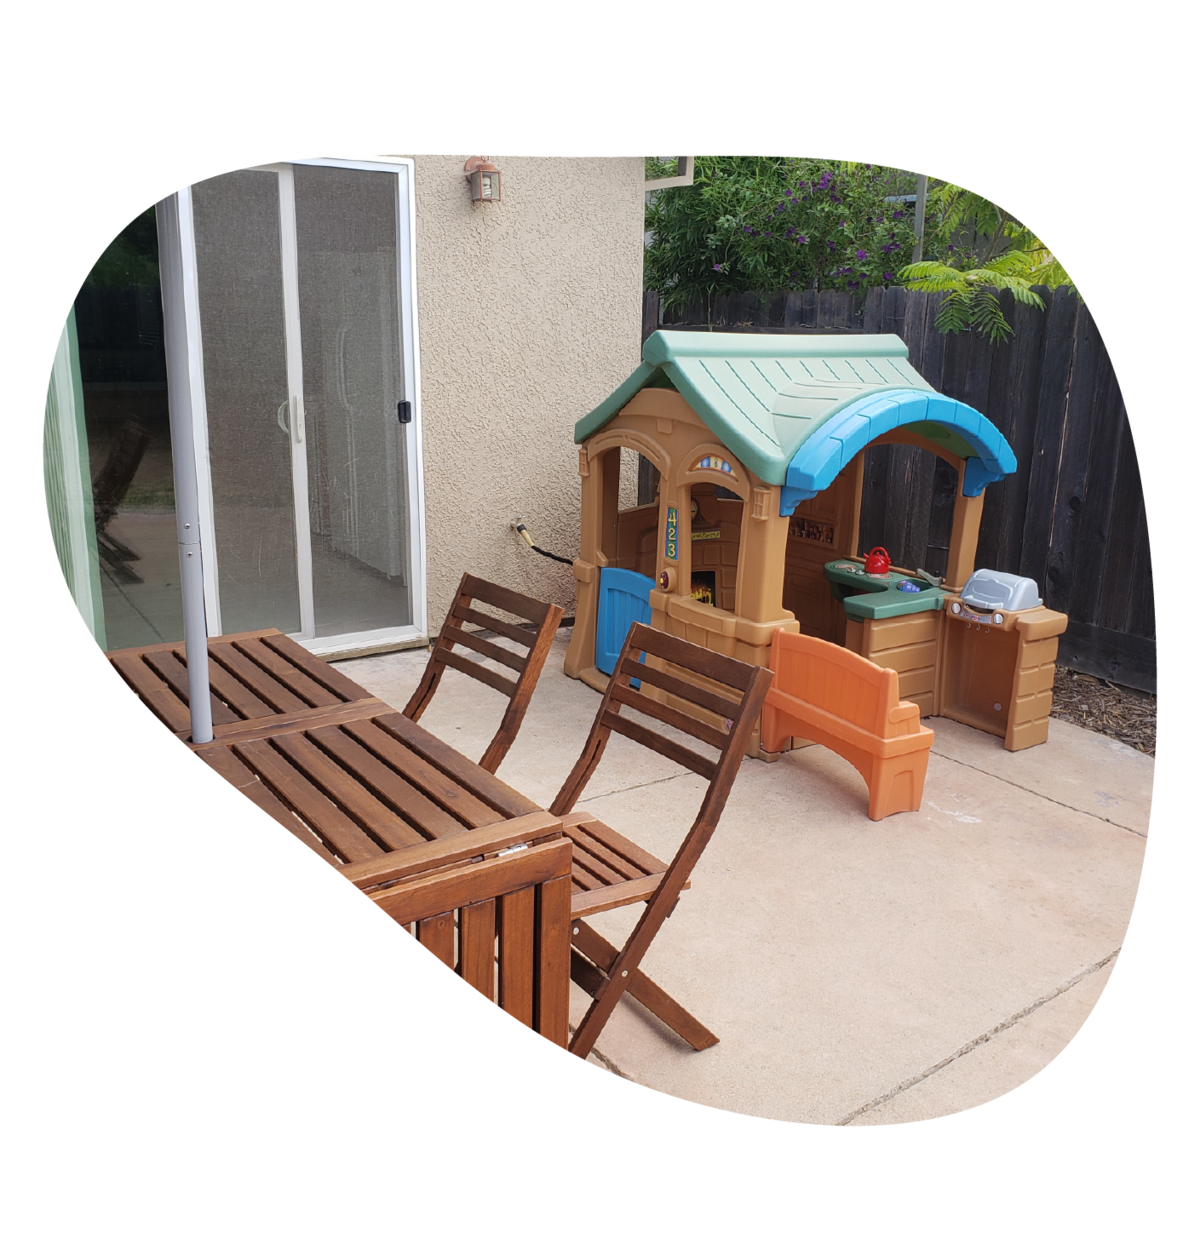 Books & Blankets daycare, located in Elk Grove, CA, offers both indoor and outdoor play spaces so our children can learn and play in the best possible environment.